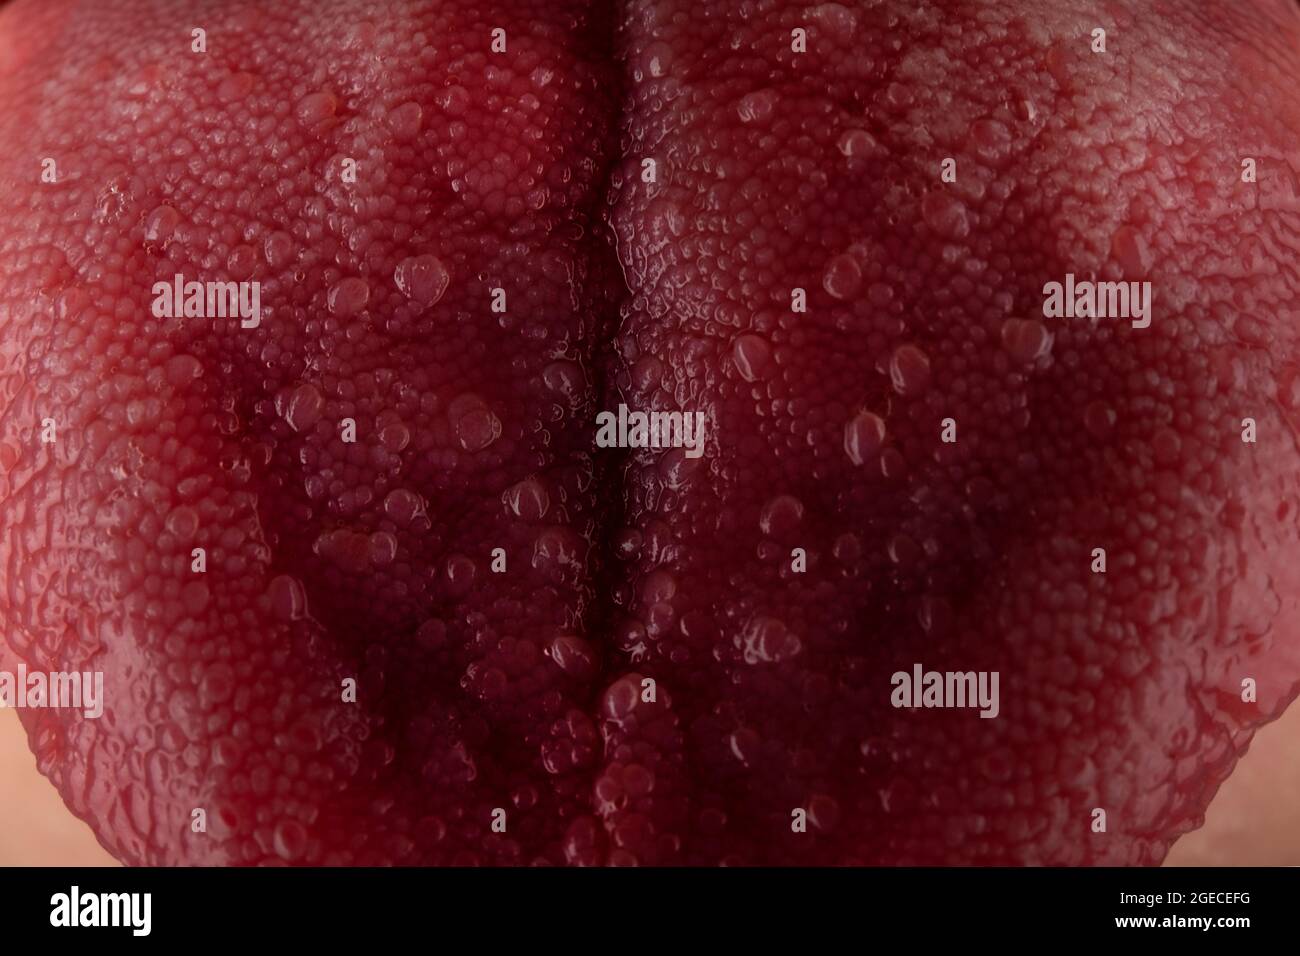 tongue with stomatitis close up, oral cancer. Stock Photo